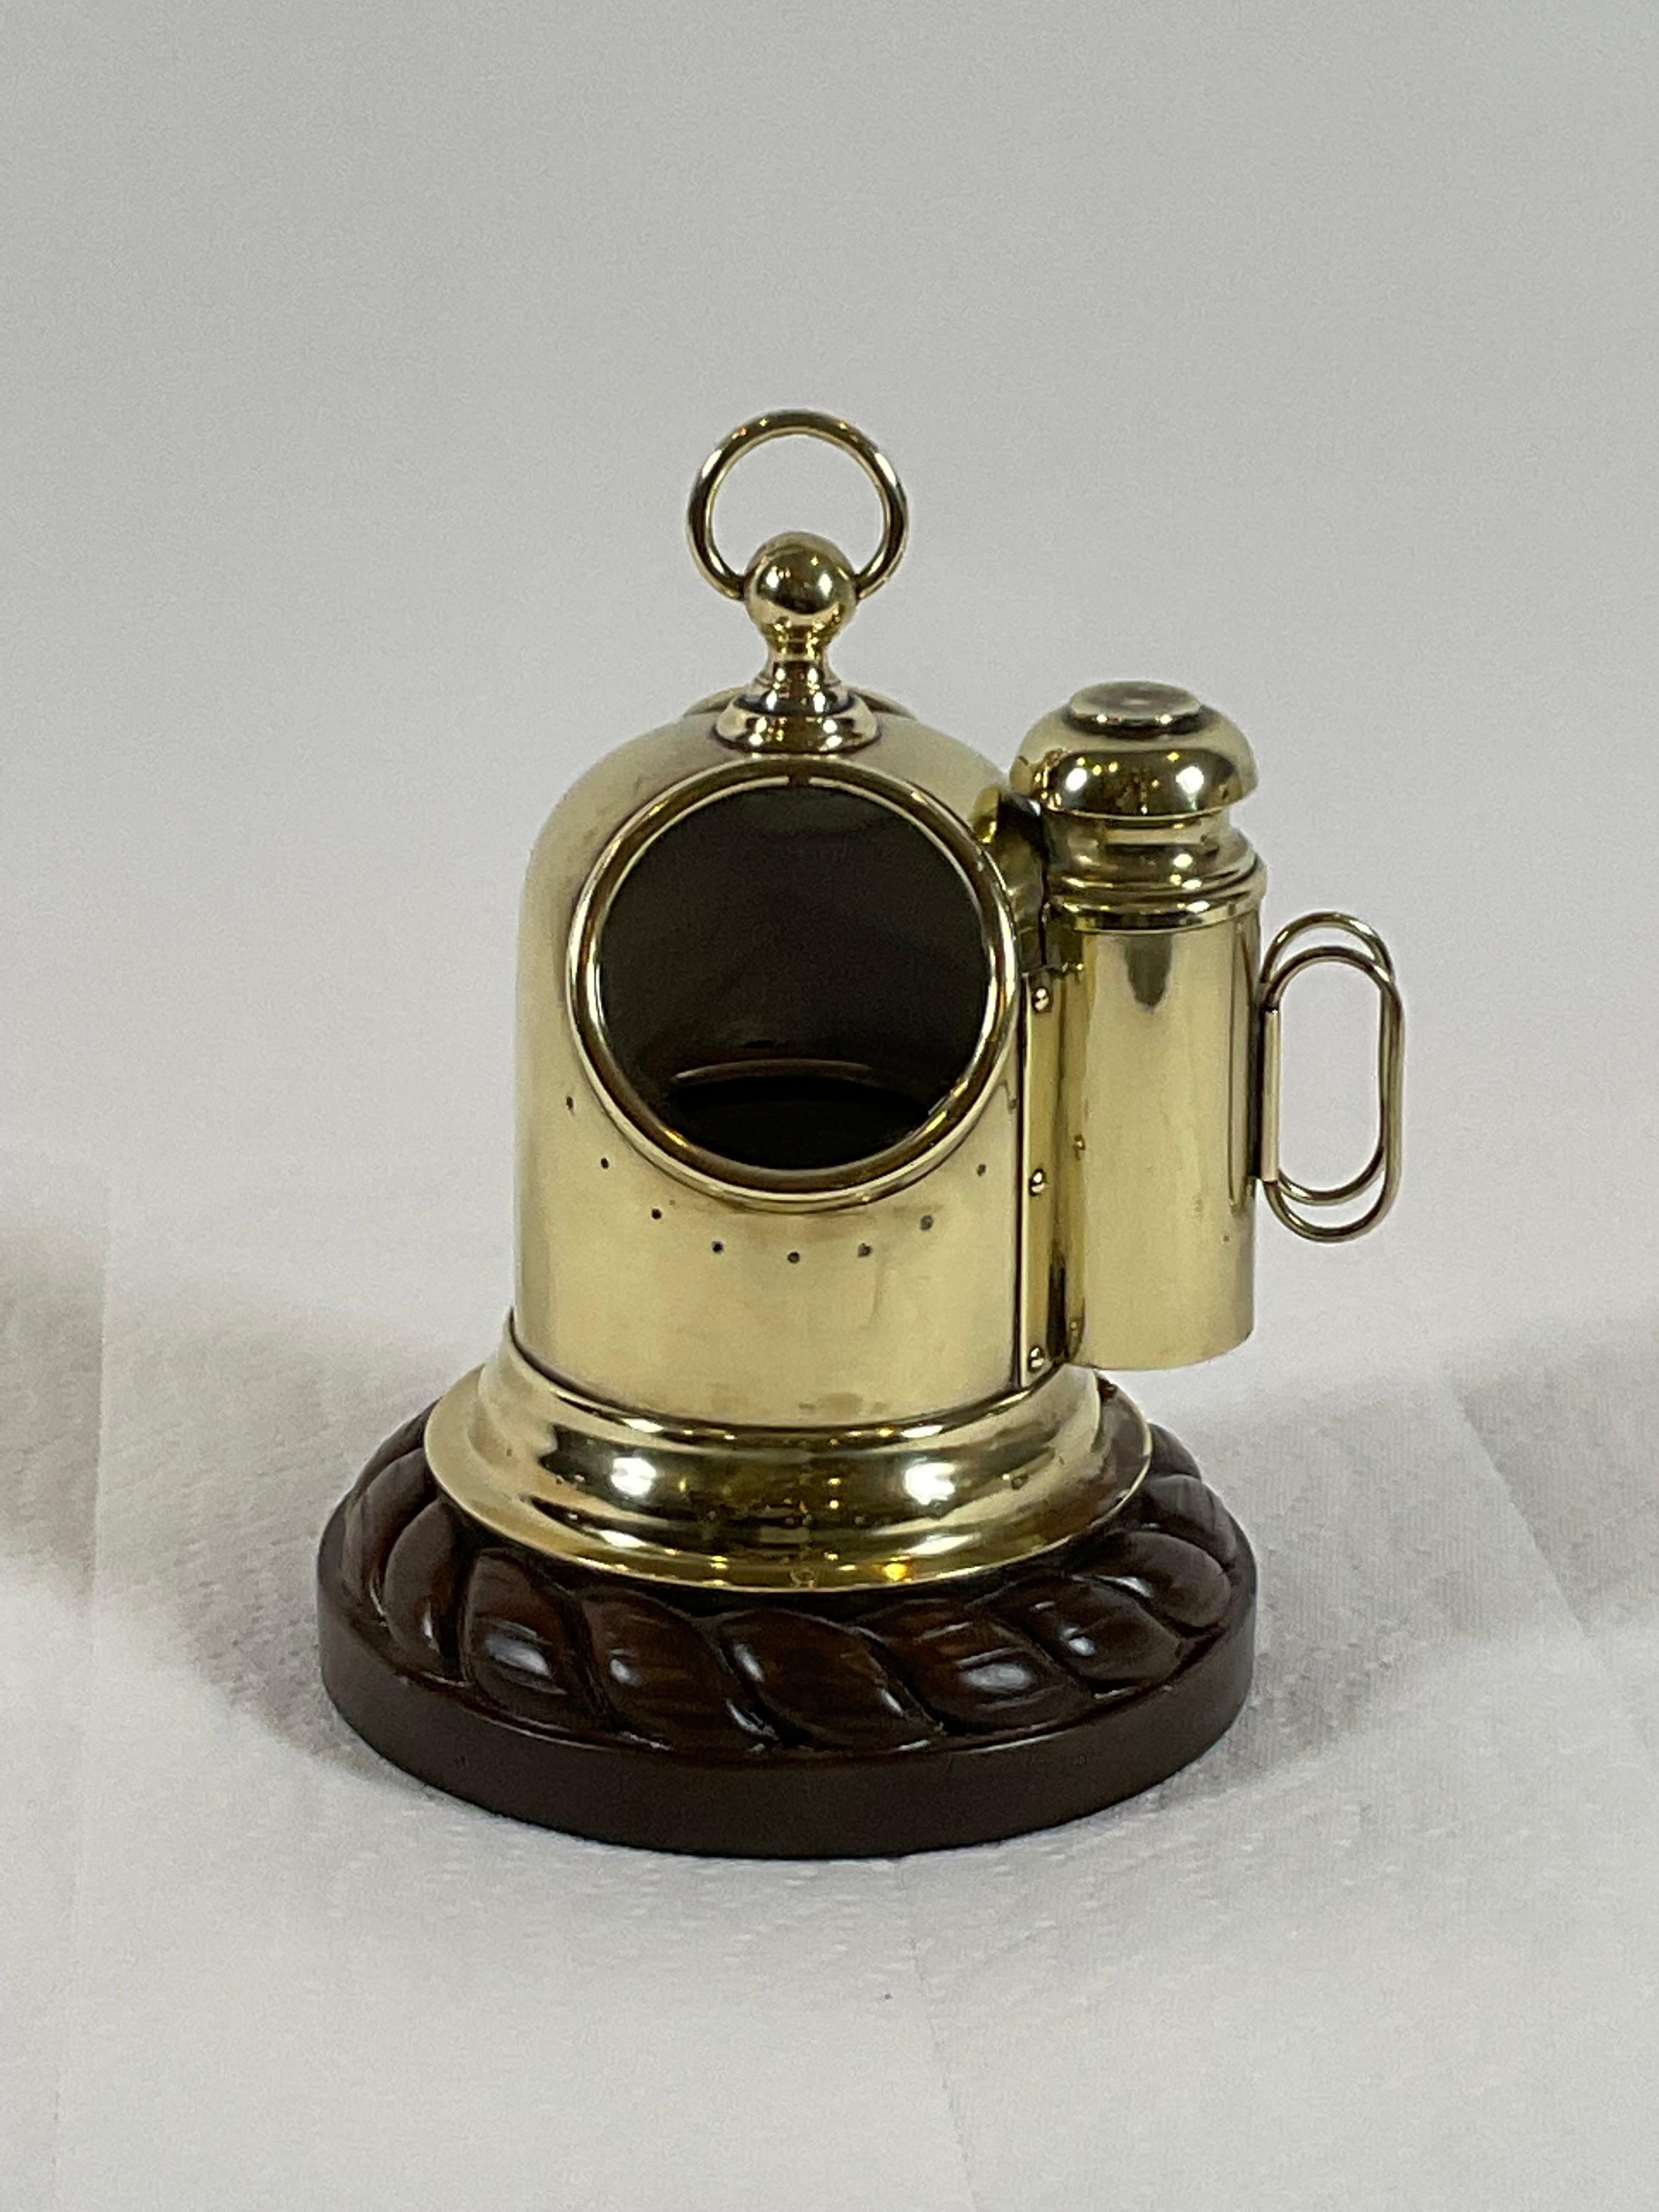 North American Brass Yacht Binnacle From the 19th Century For Sale